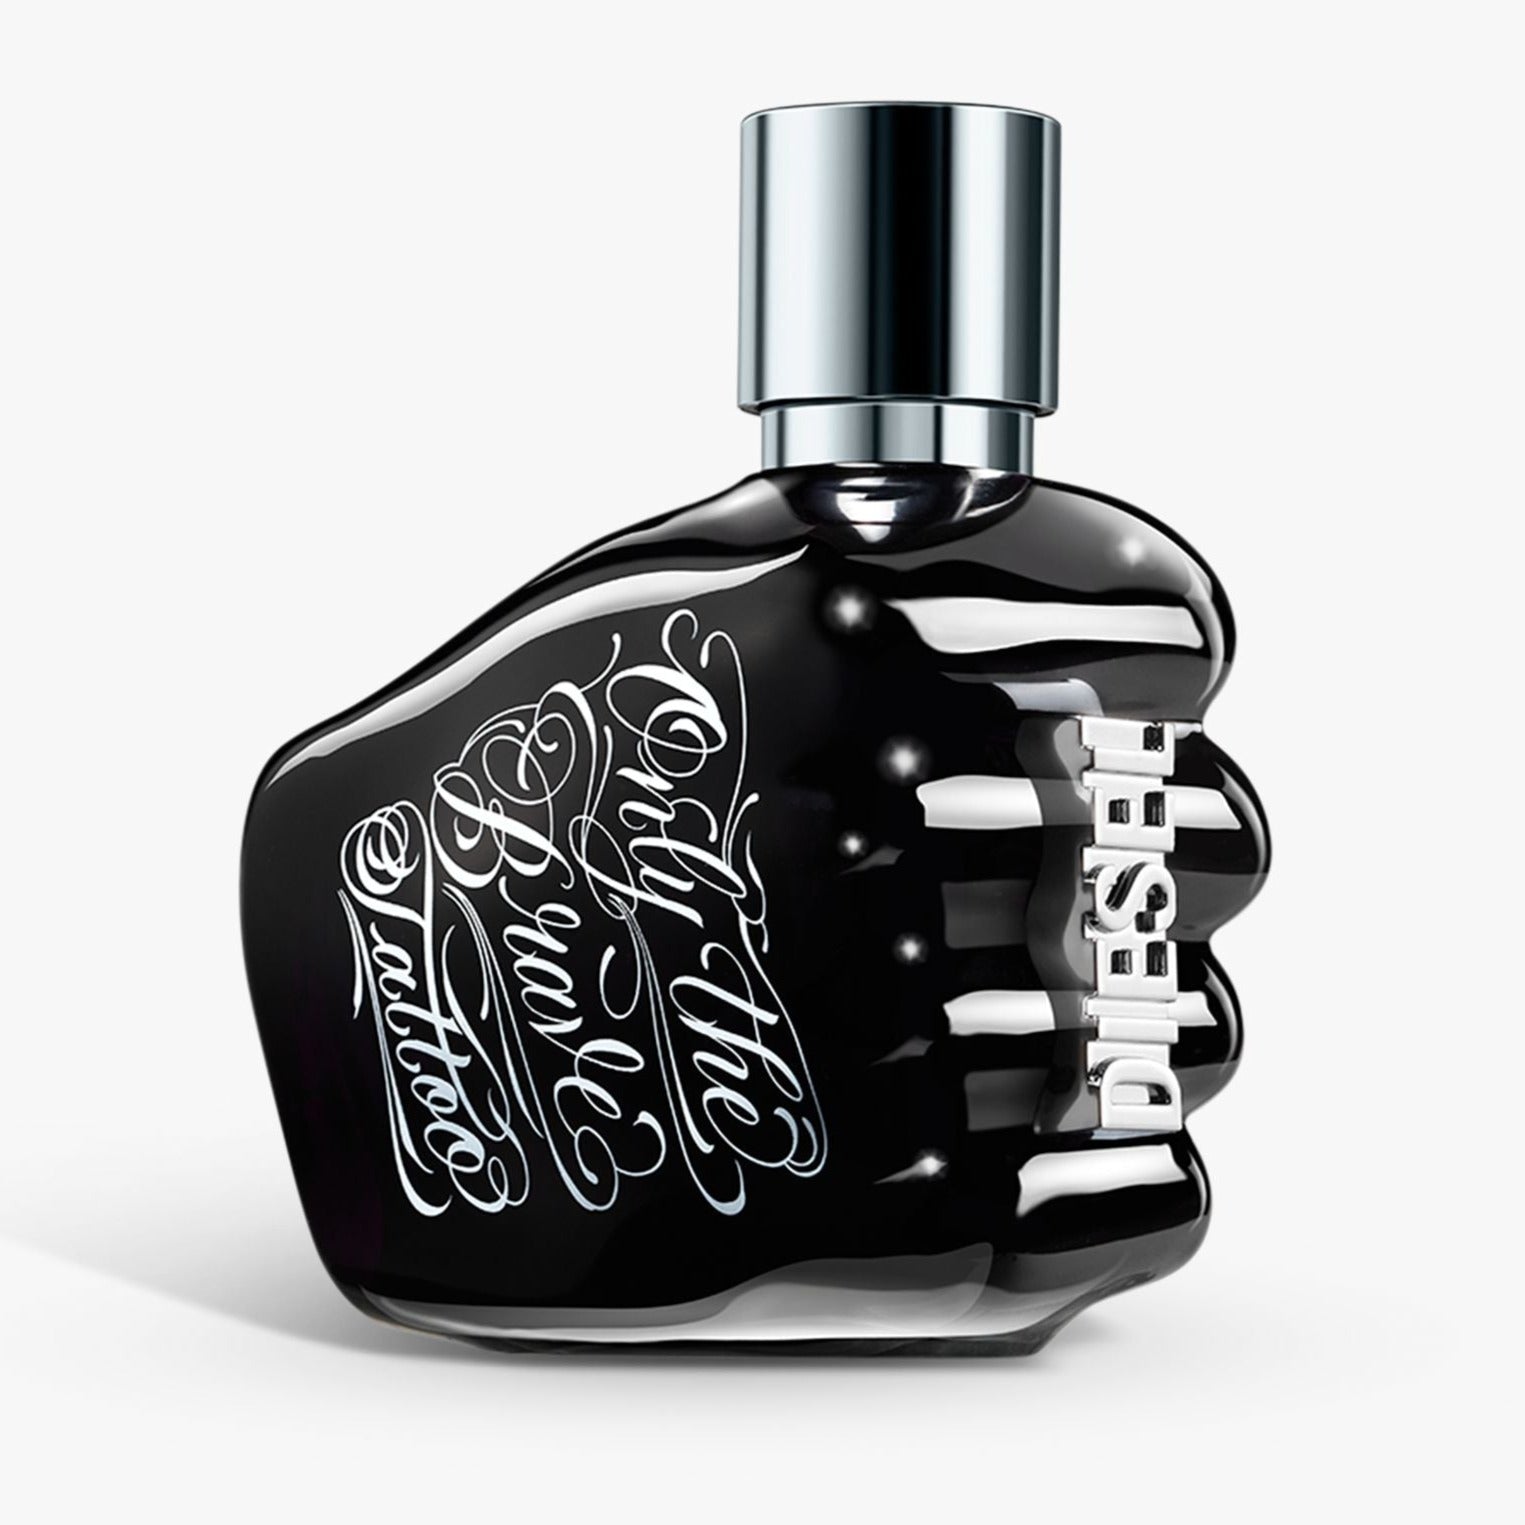 Diesel Only The Brave Tattoo EDT | My Perfume Shop Australia